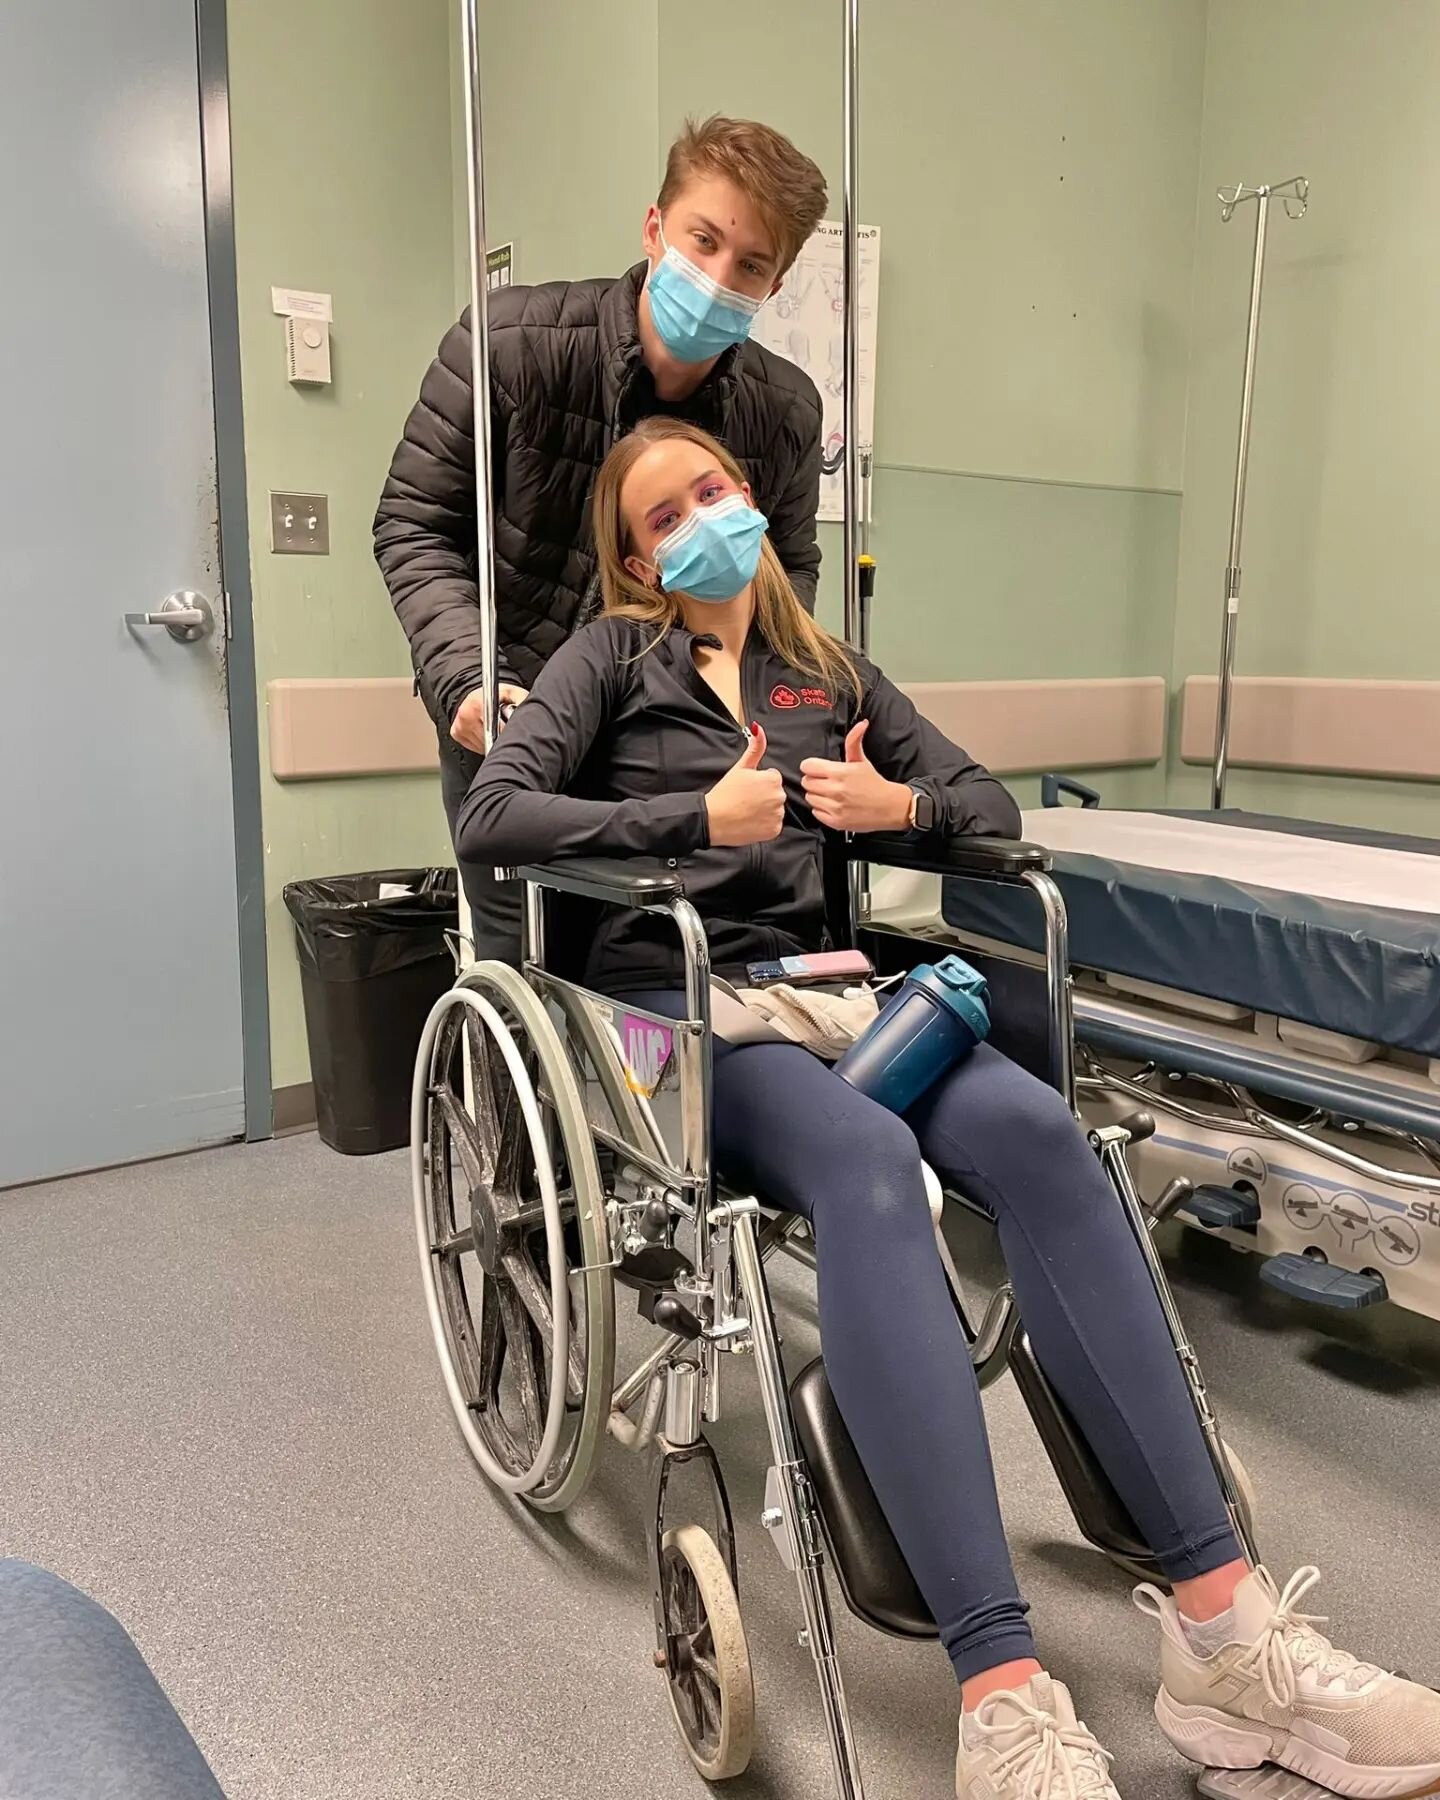 This is what it means to be a team. Yesterday at practice in Winnipeg, Emma Goodstadt and Christian Bennett were involved in a collision with their teammates Sophia Gover and Billy Wilson French. Both going backwards, a moment of blindness, and disas